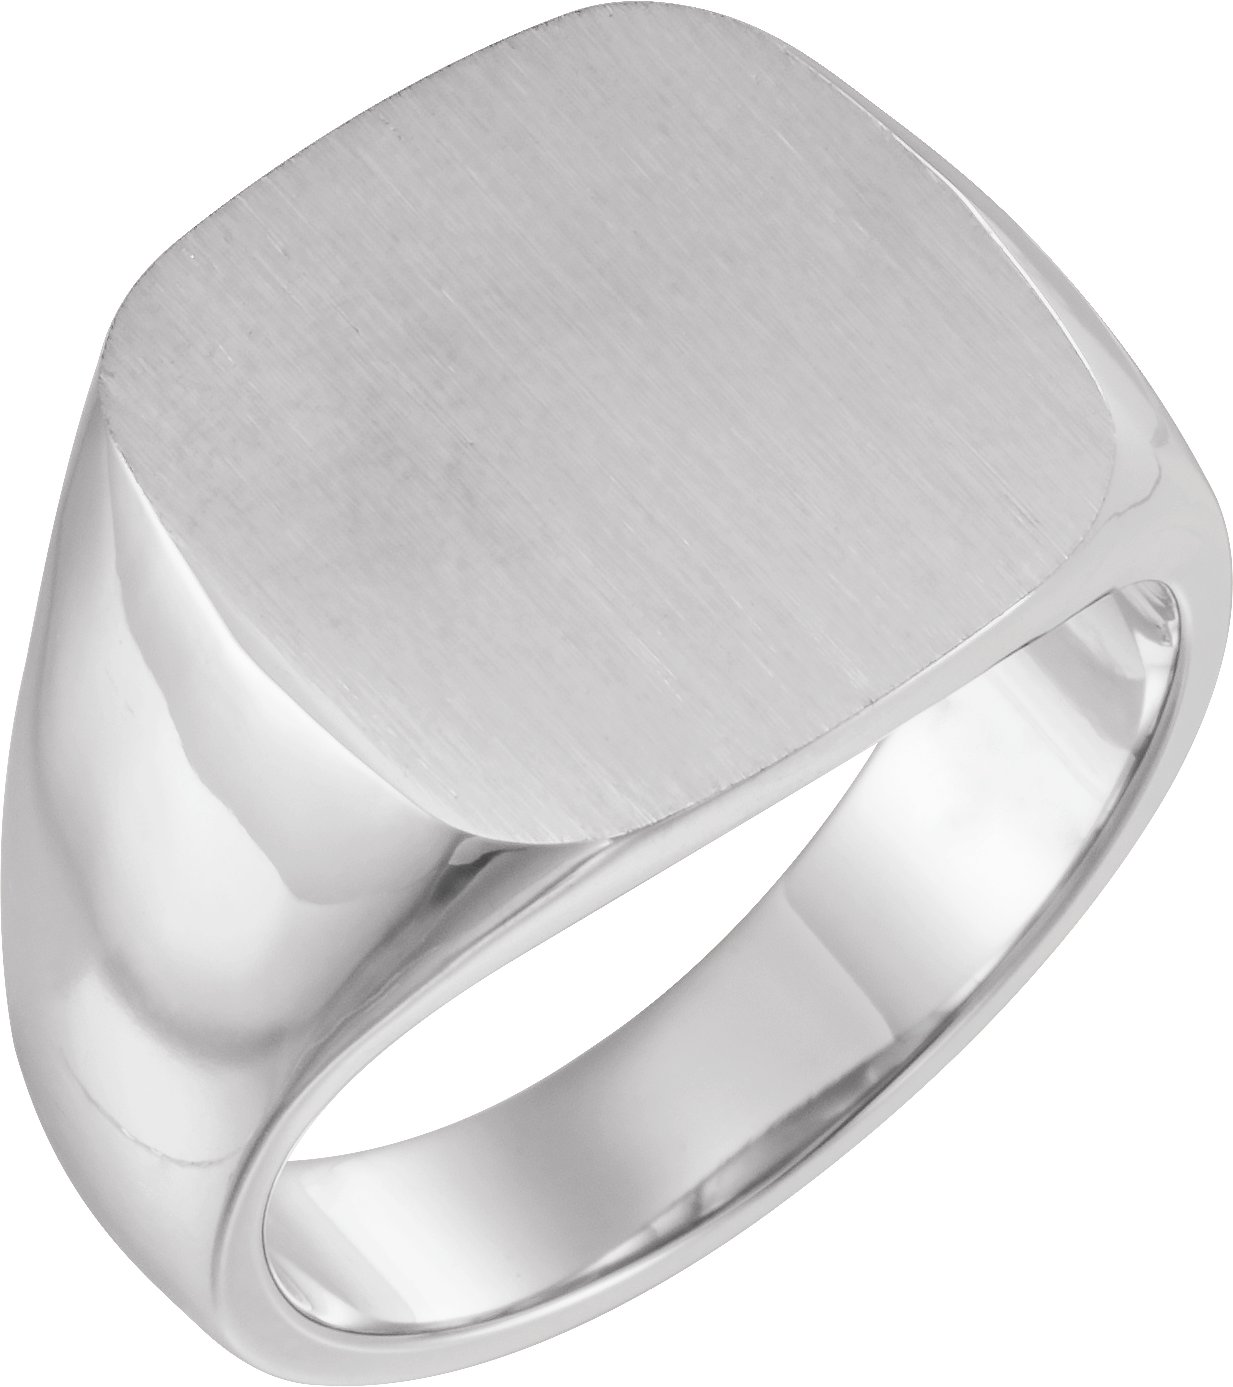 Sterling Silver 16 mm Square Signet Ring with Brush Finished Top